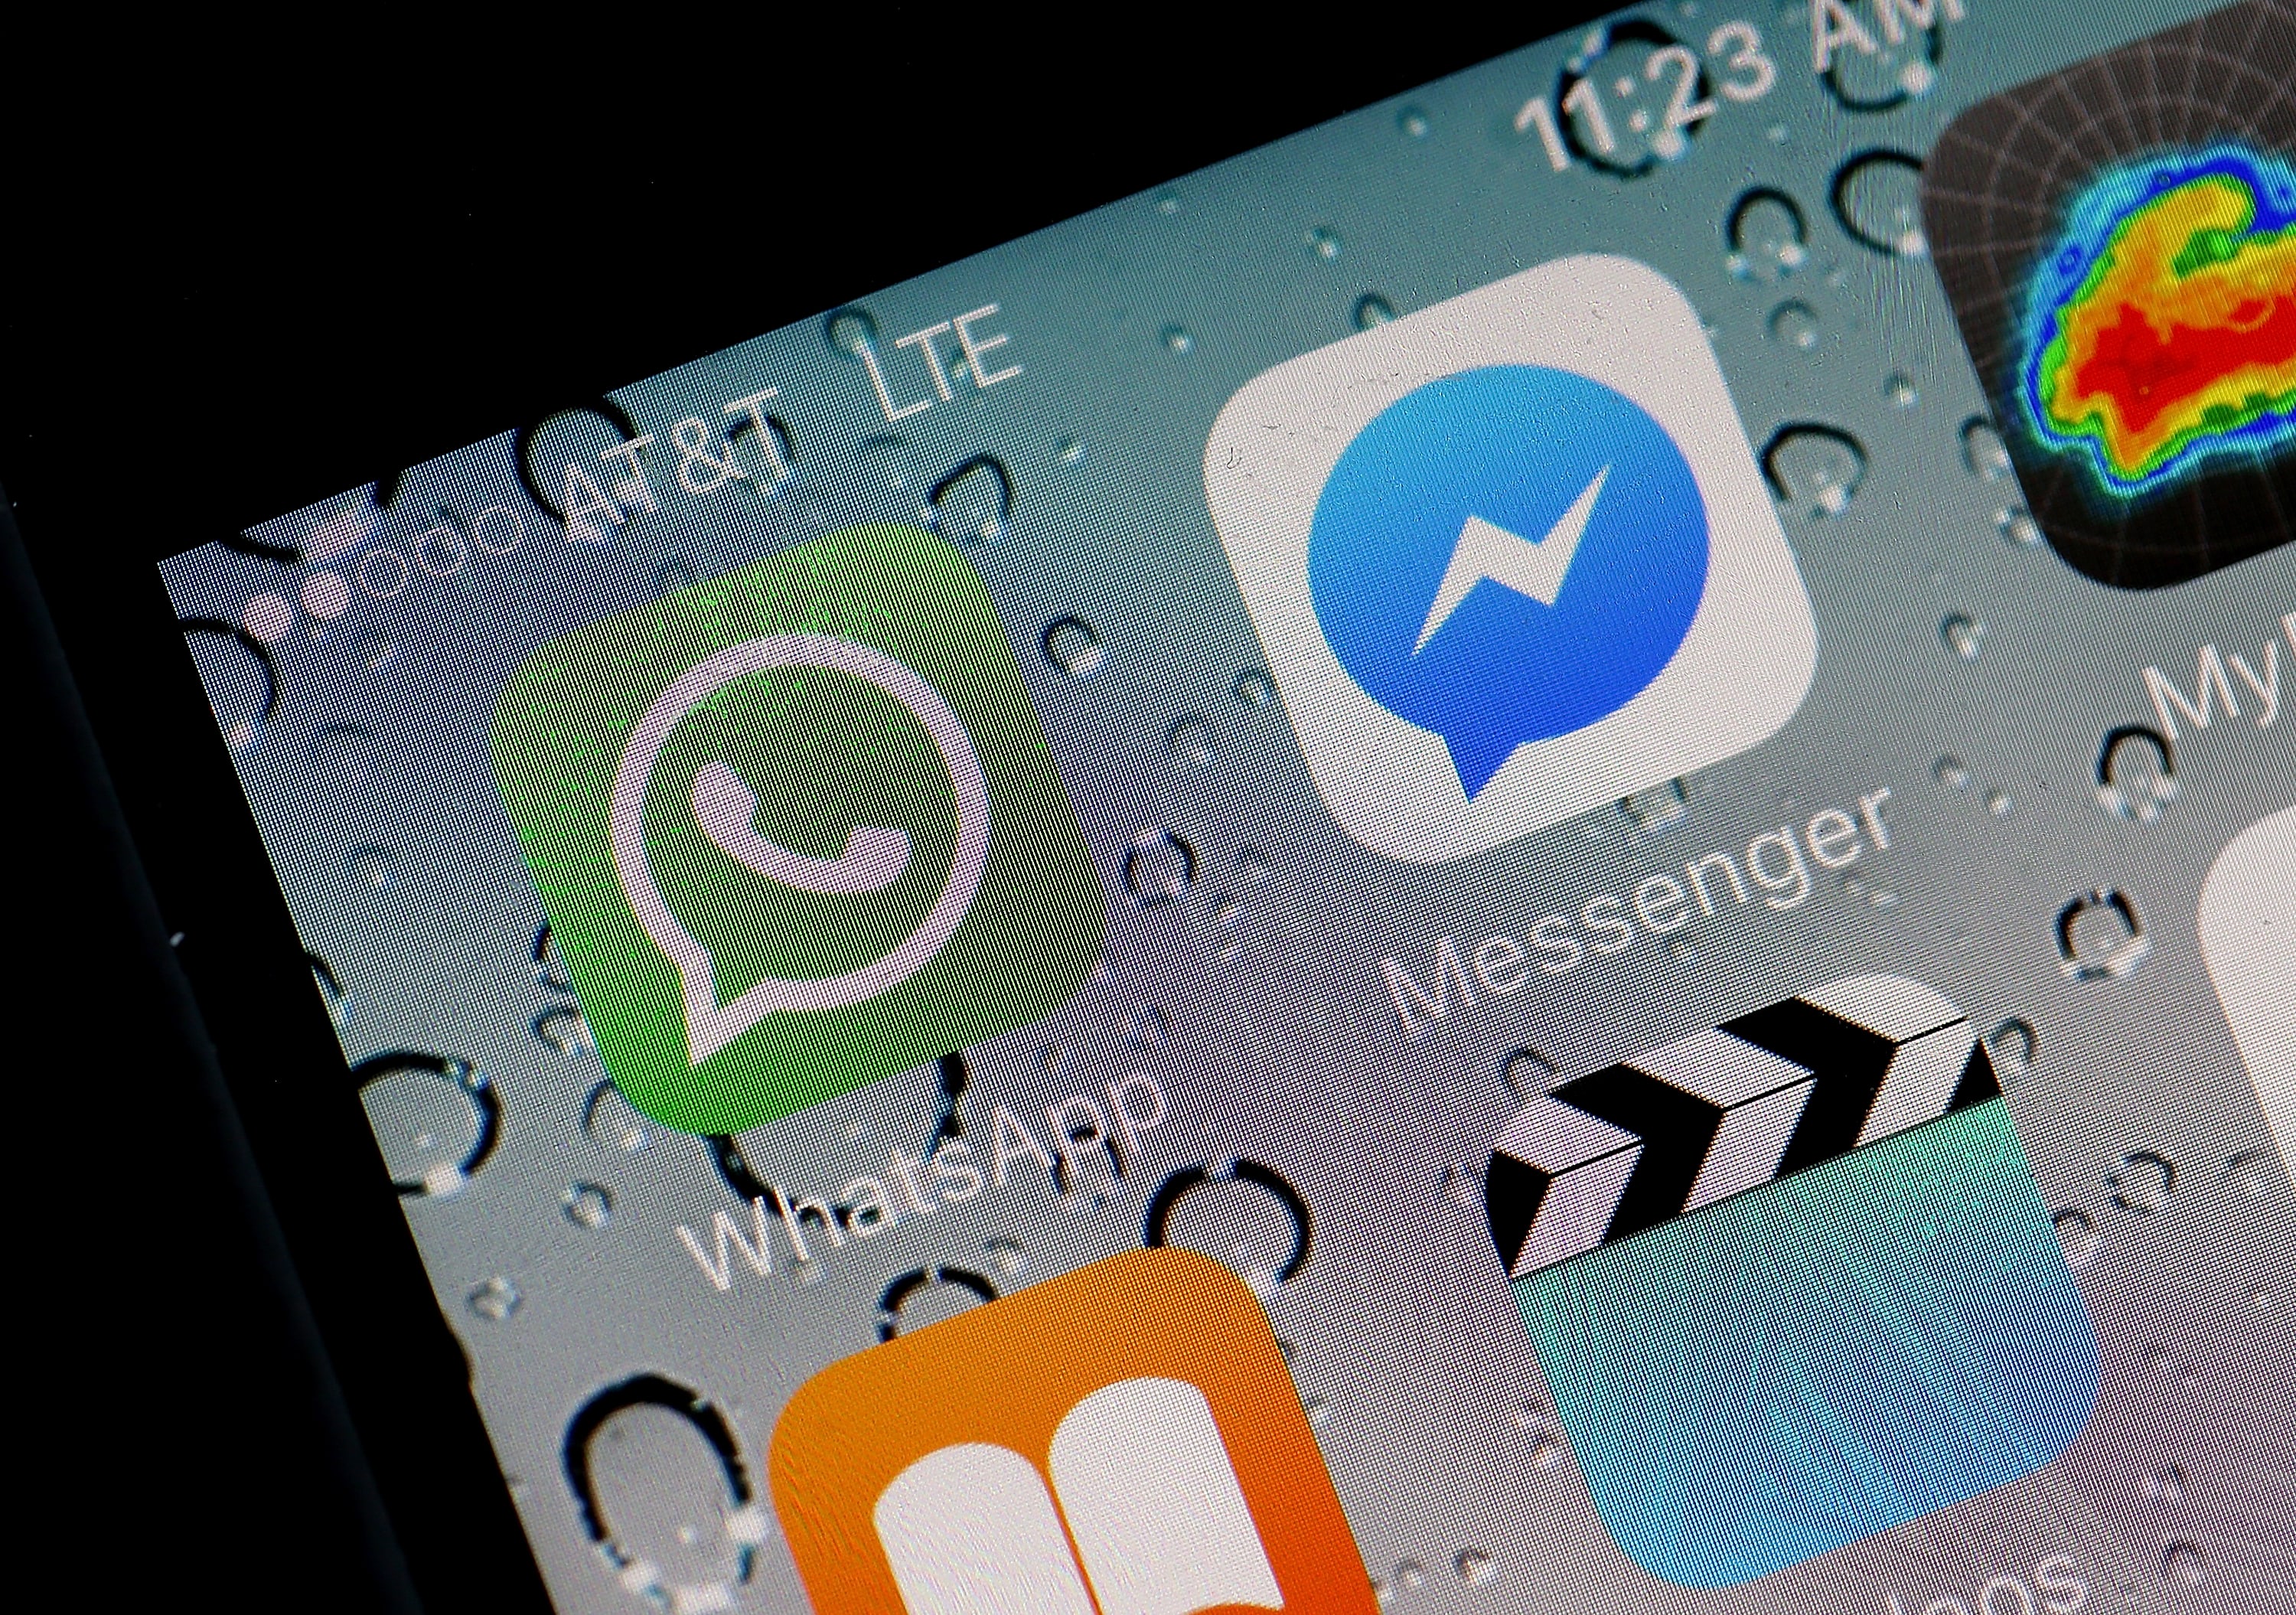 Europe looks to crack open data encryption on messaging services like WhatsApp - CNBC